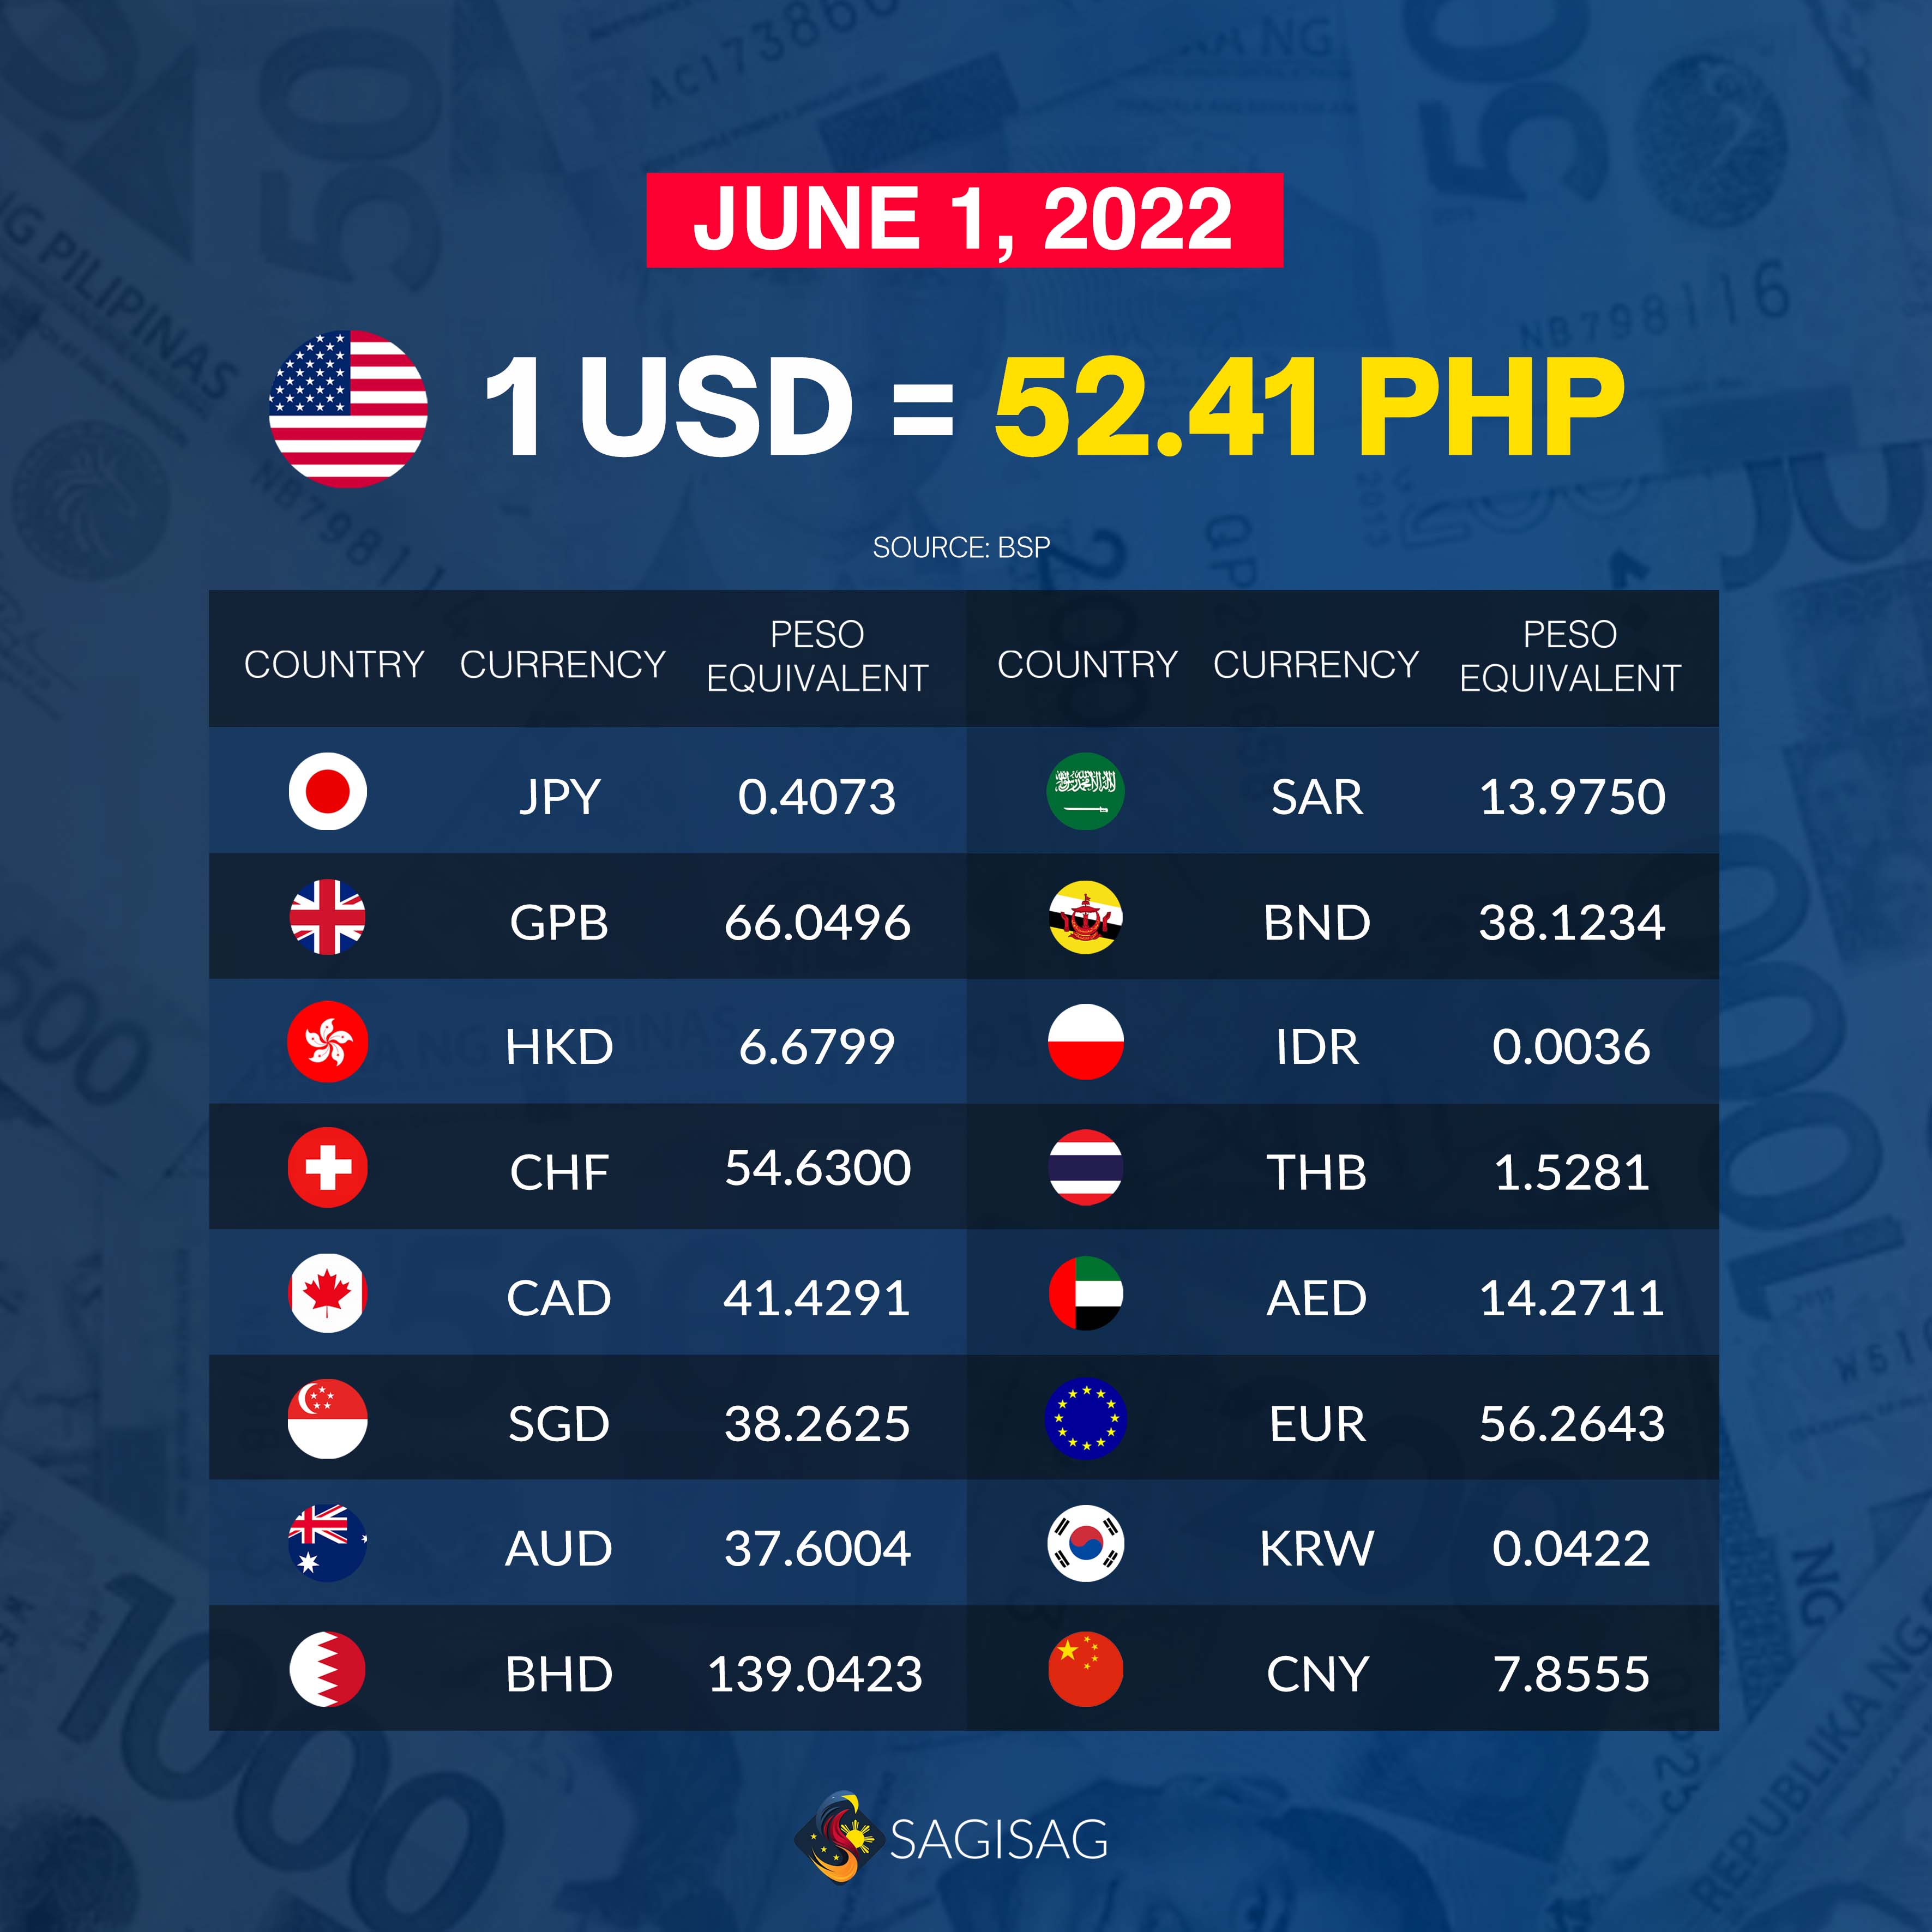 50 US Dollars (USD) to Philippine Pesos (PHP) - Currency Converter